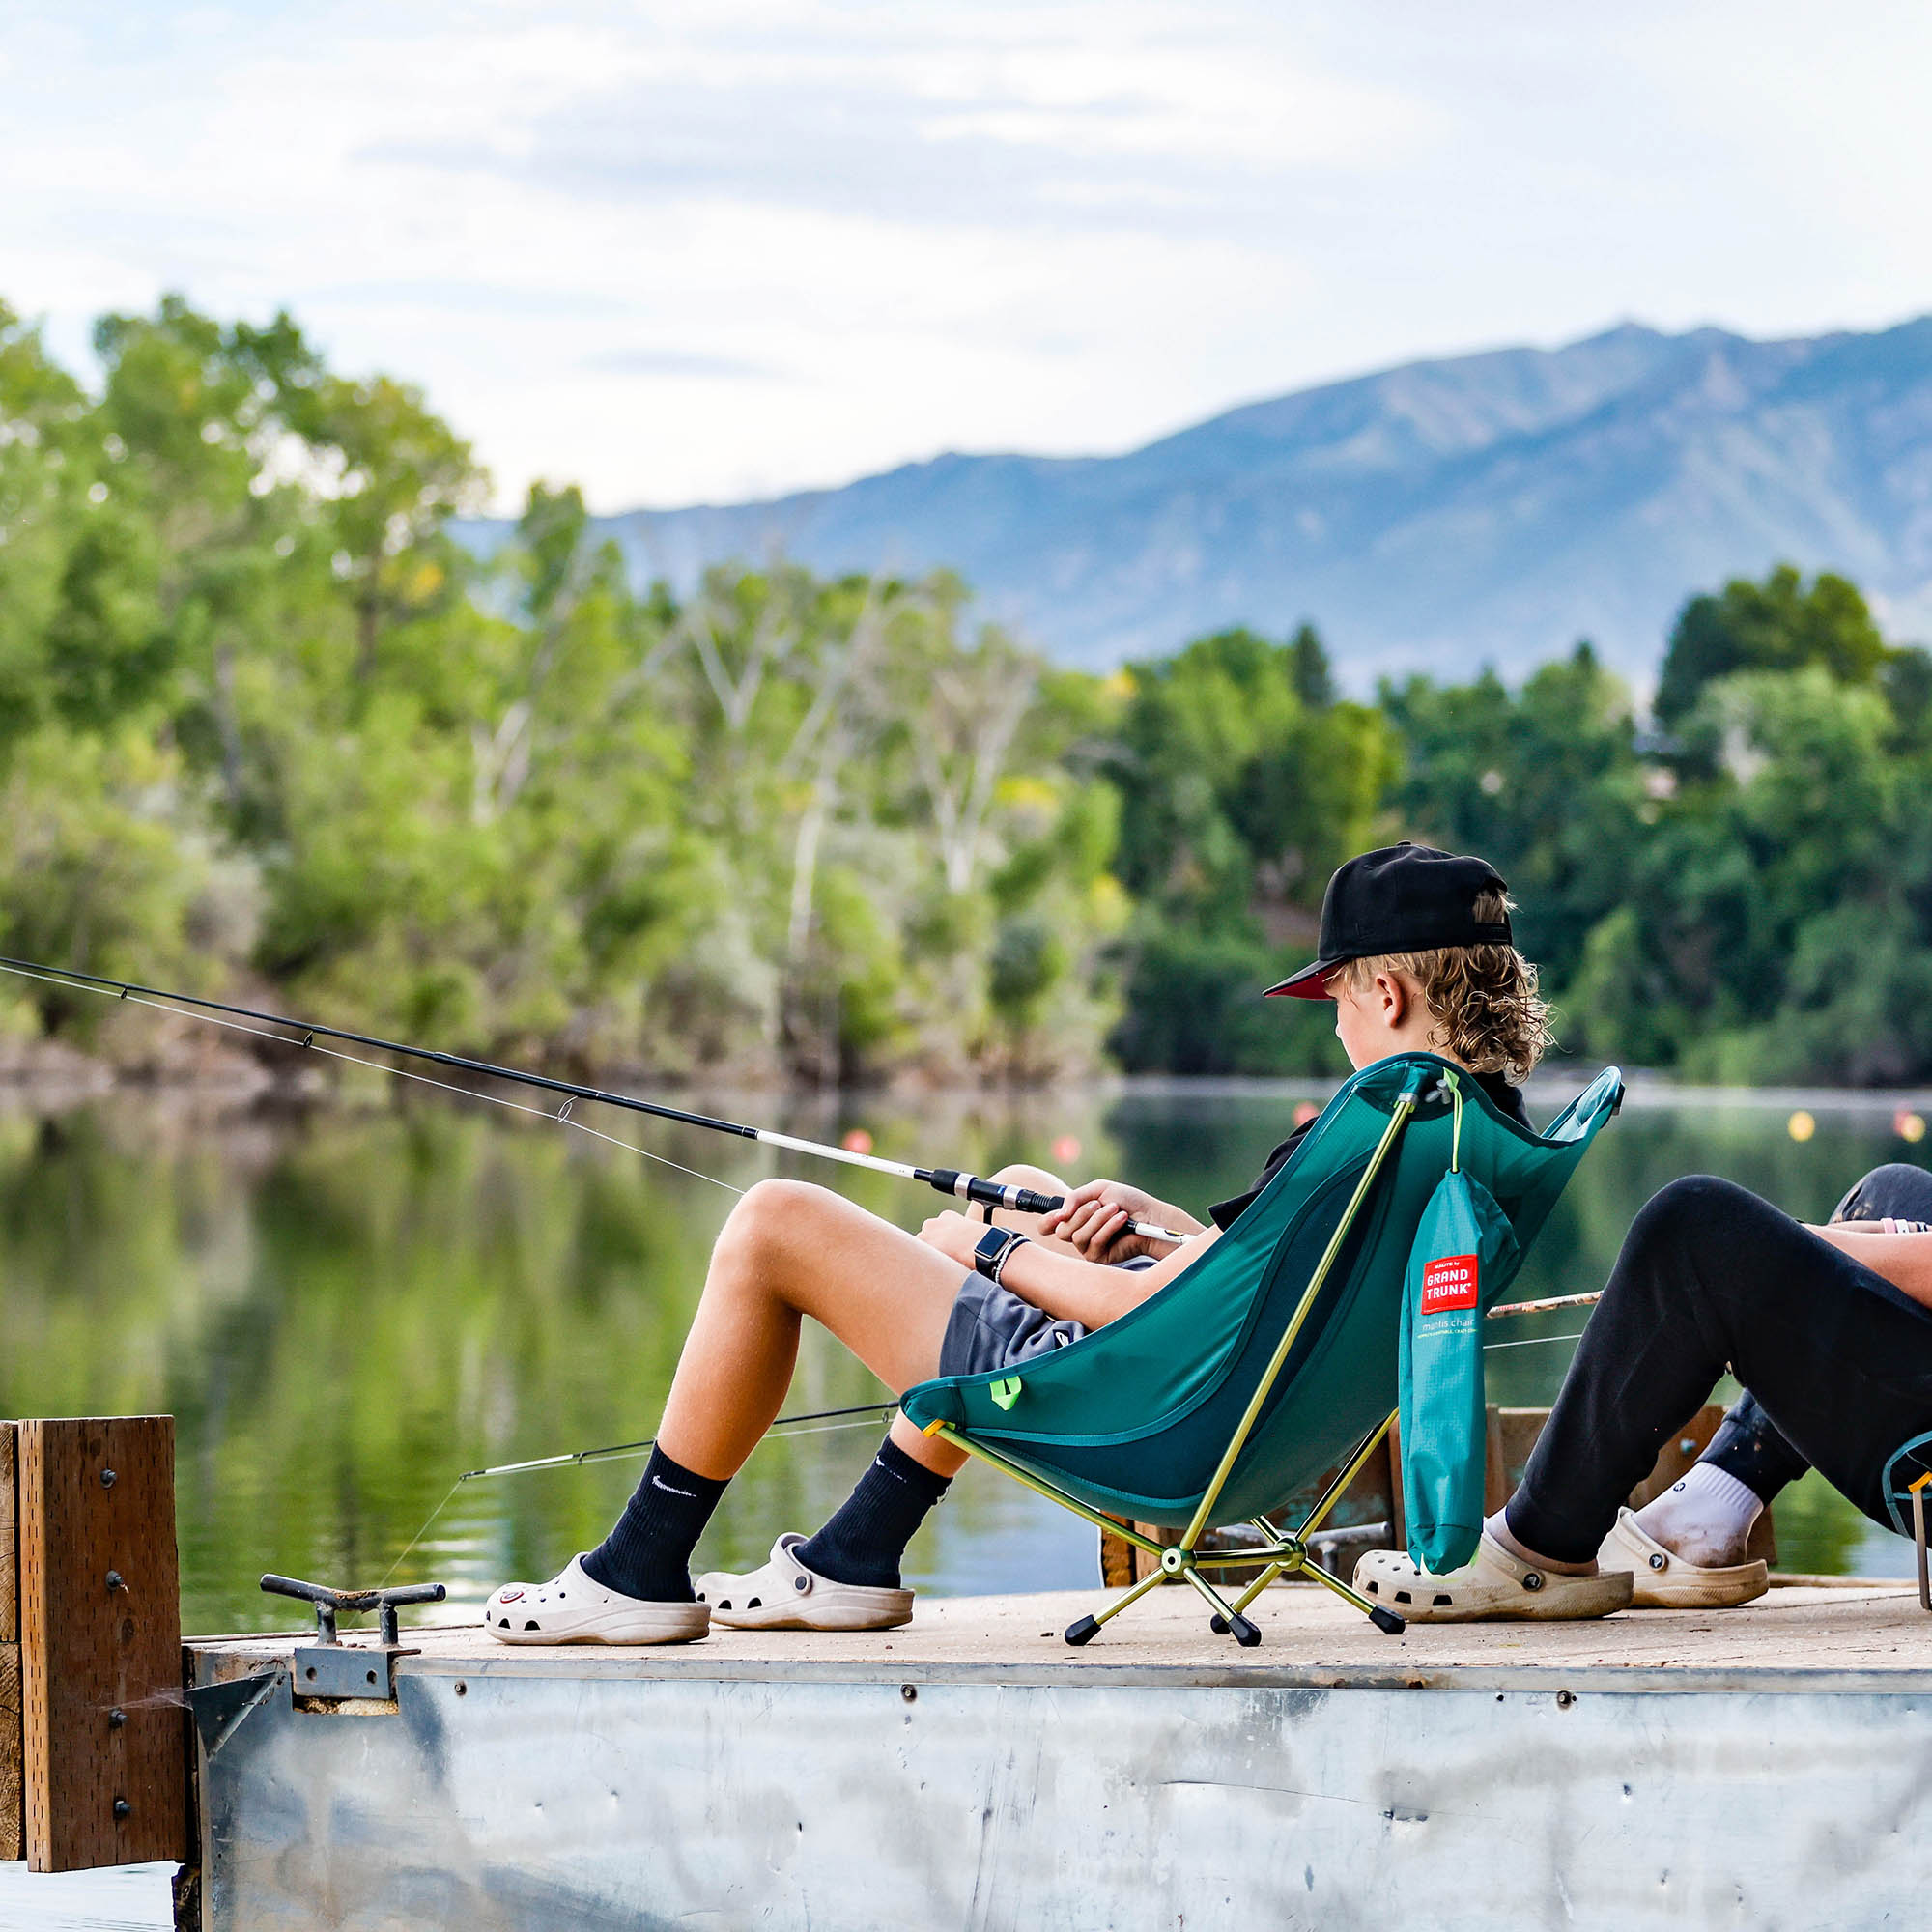 young man sits in mantis chair on dock fishing in a lake with mountains in background